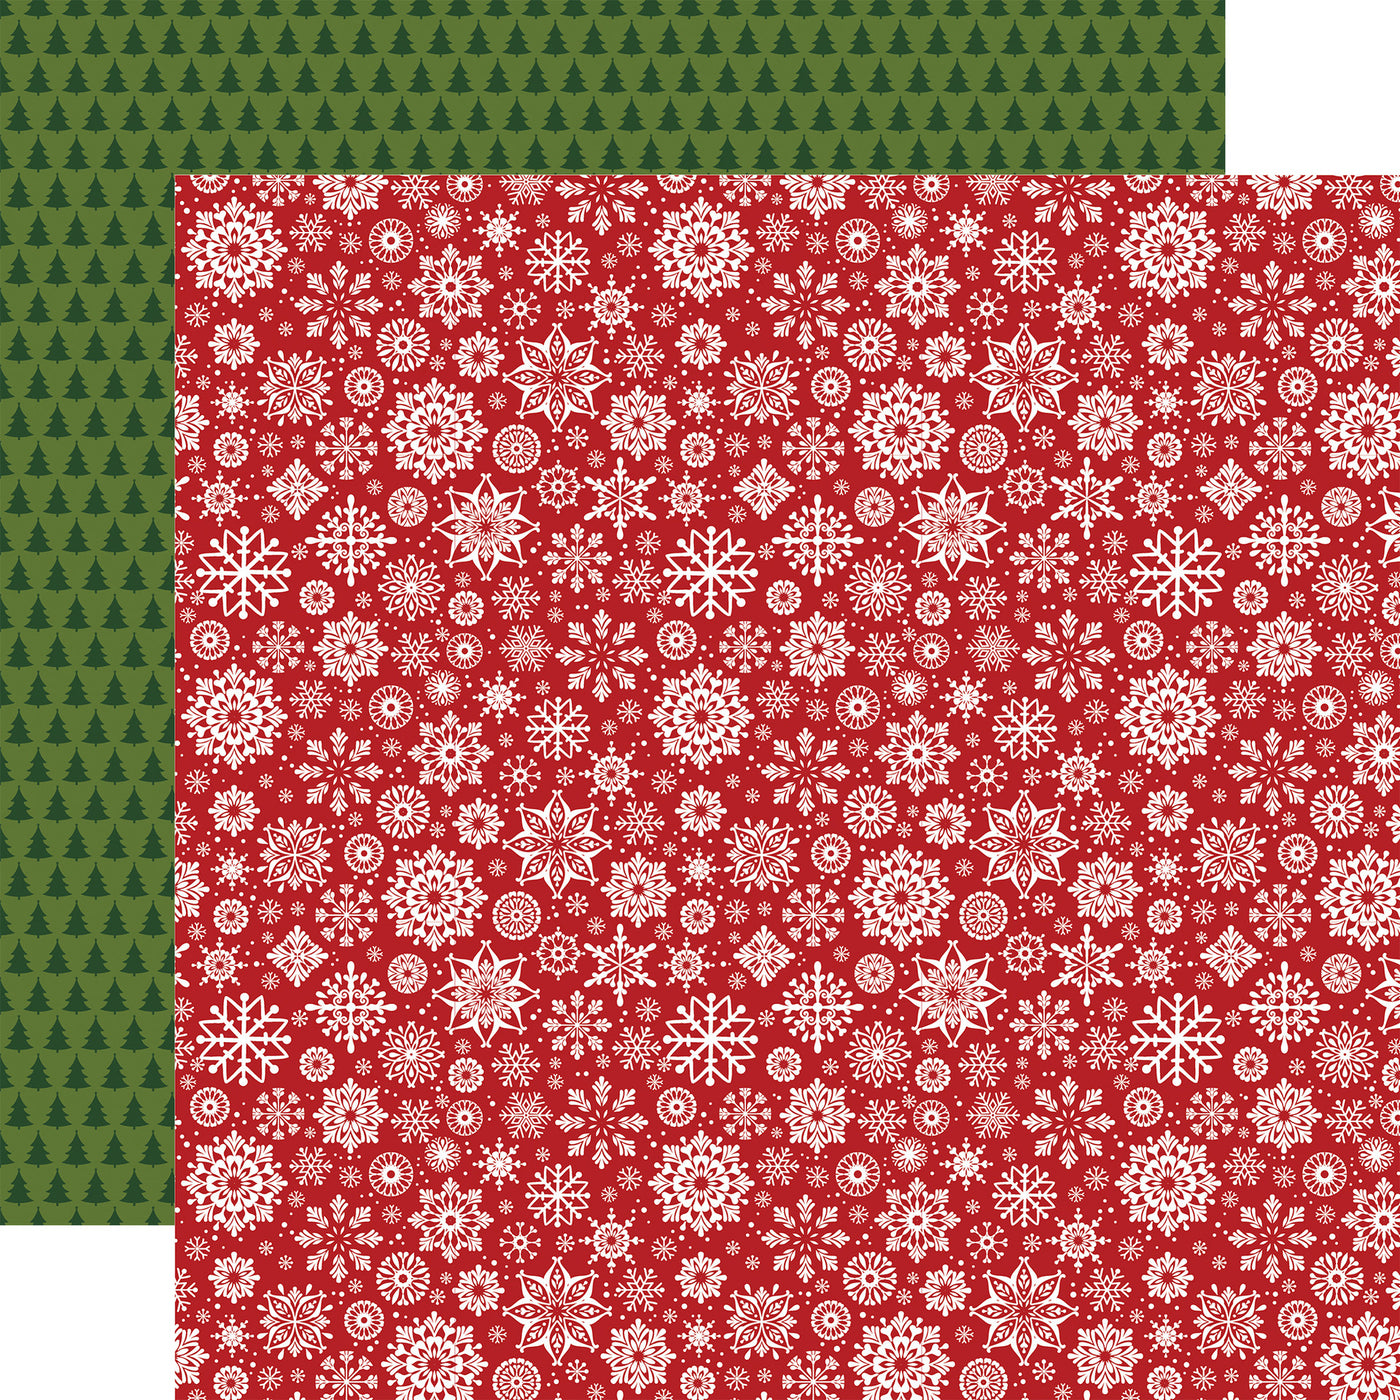 (Side A - white snowflakes on a red background, Side B - rows of little dark green Christmas trees on a green background)